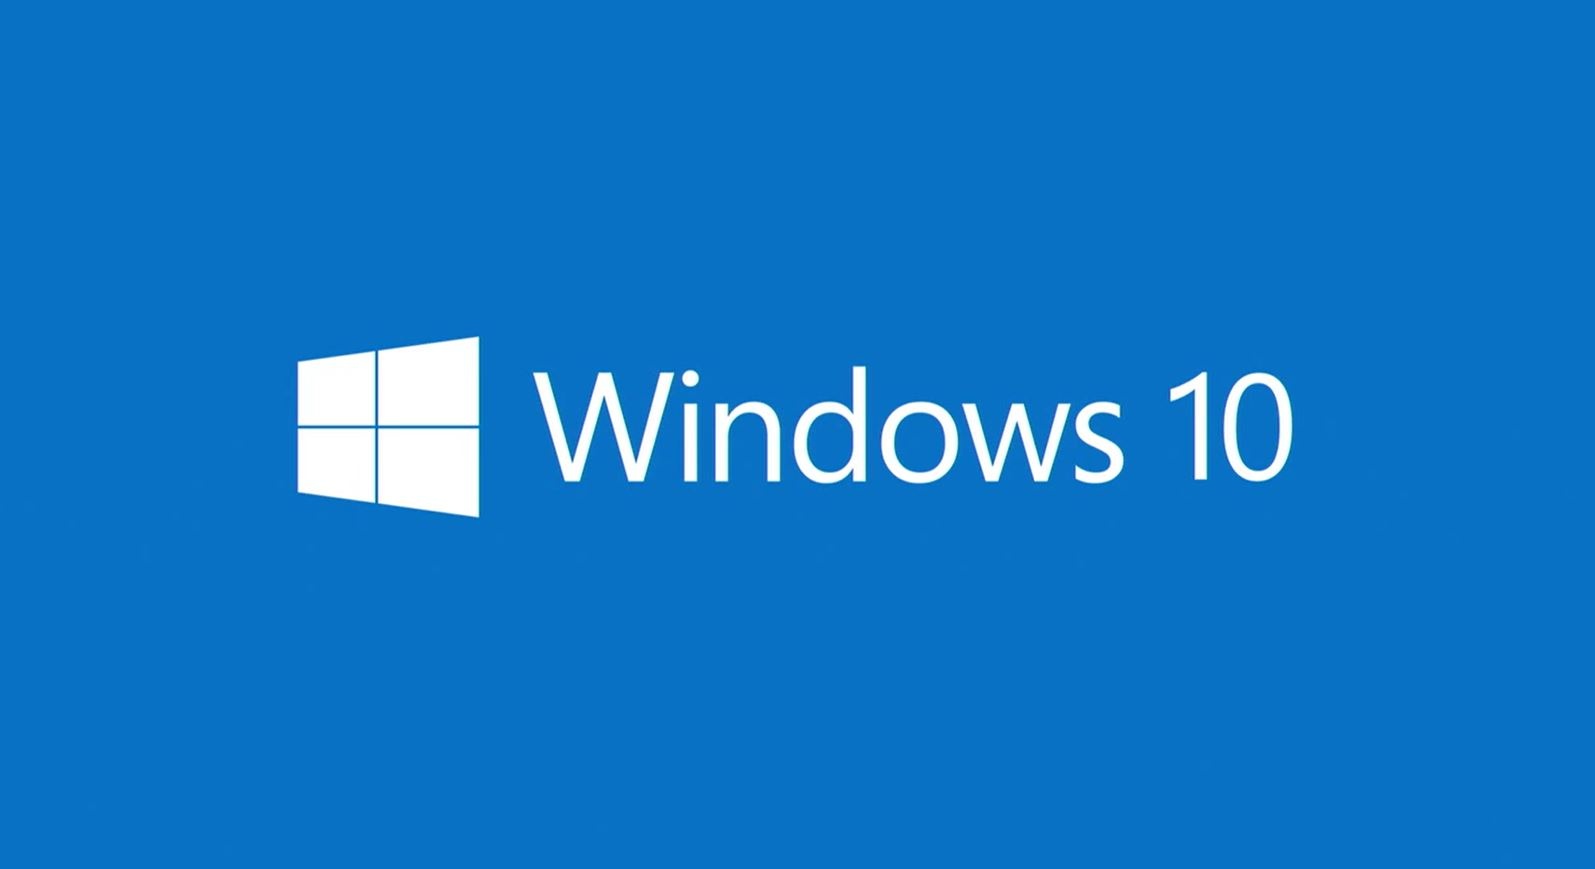 Microsoft Releases Windows 10 in 190 Countries
  